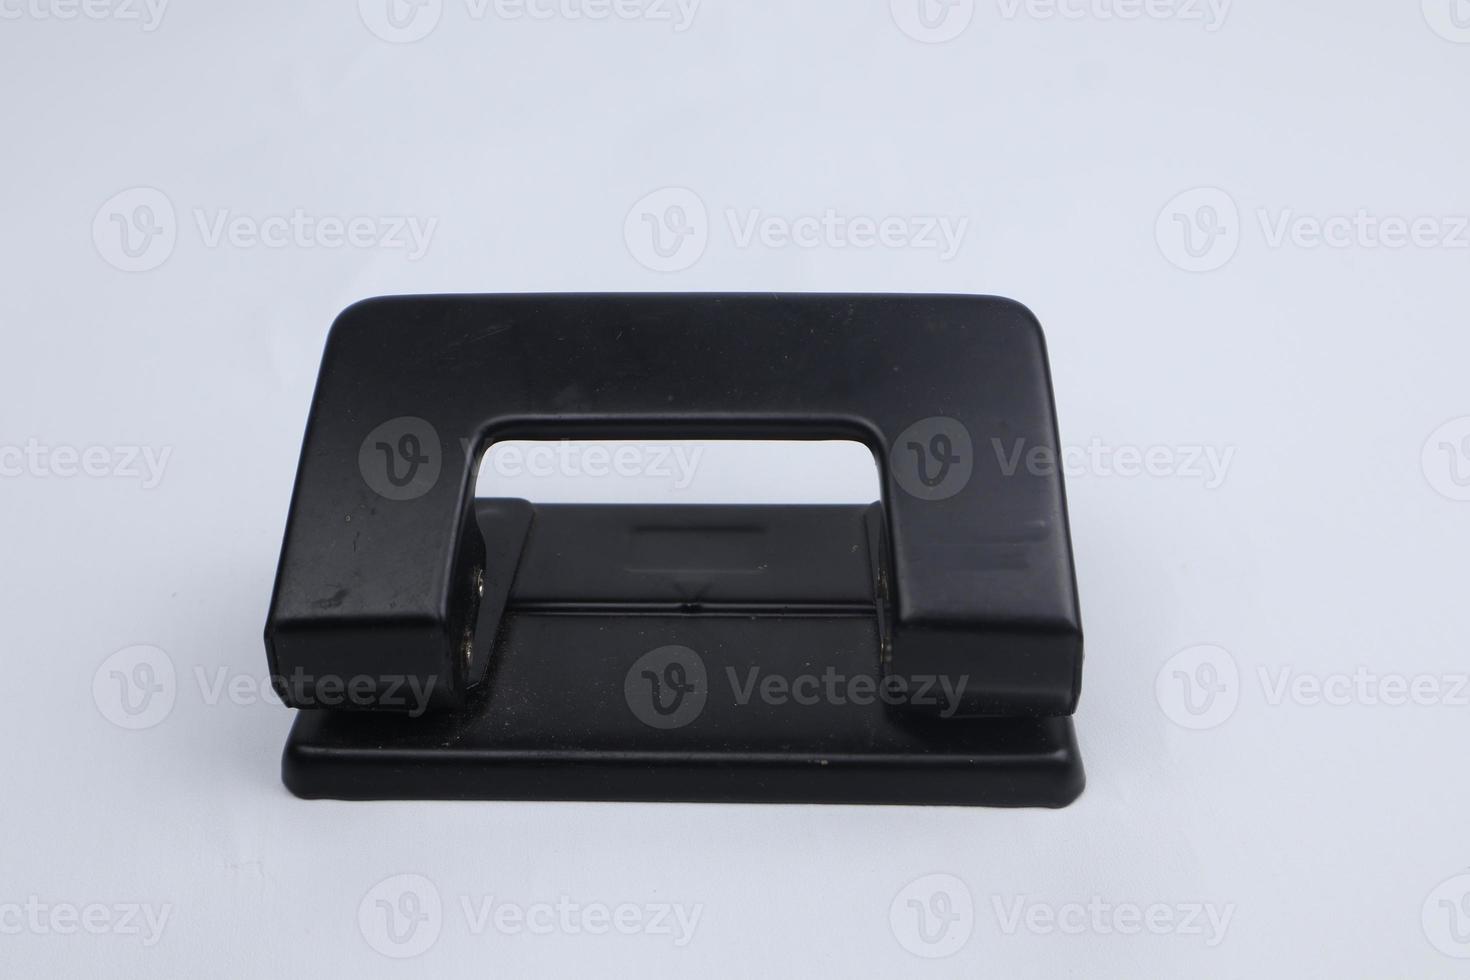 Office paper perforator isolated on white background. Office tool that is used to create holes in sheets of paper. Paper Metal Stationary Hole Puncher. Office file-punch photo